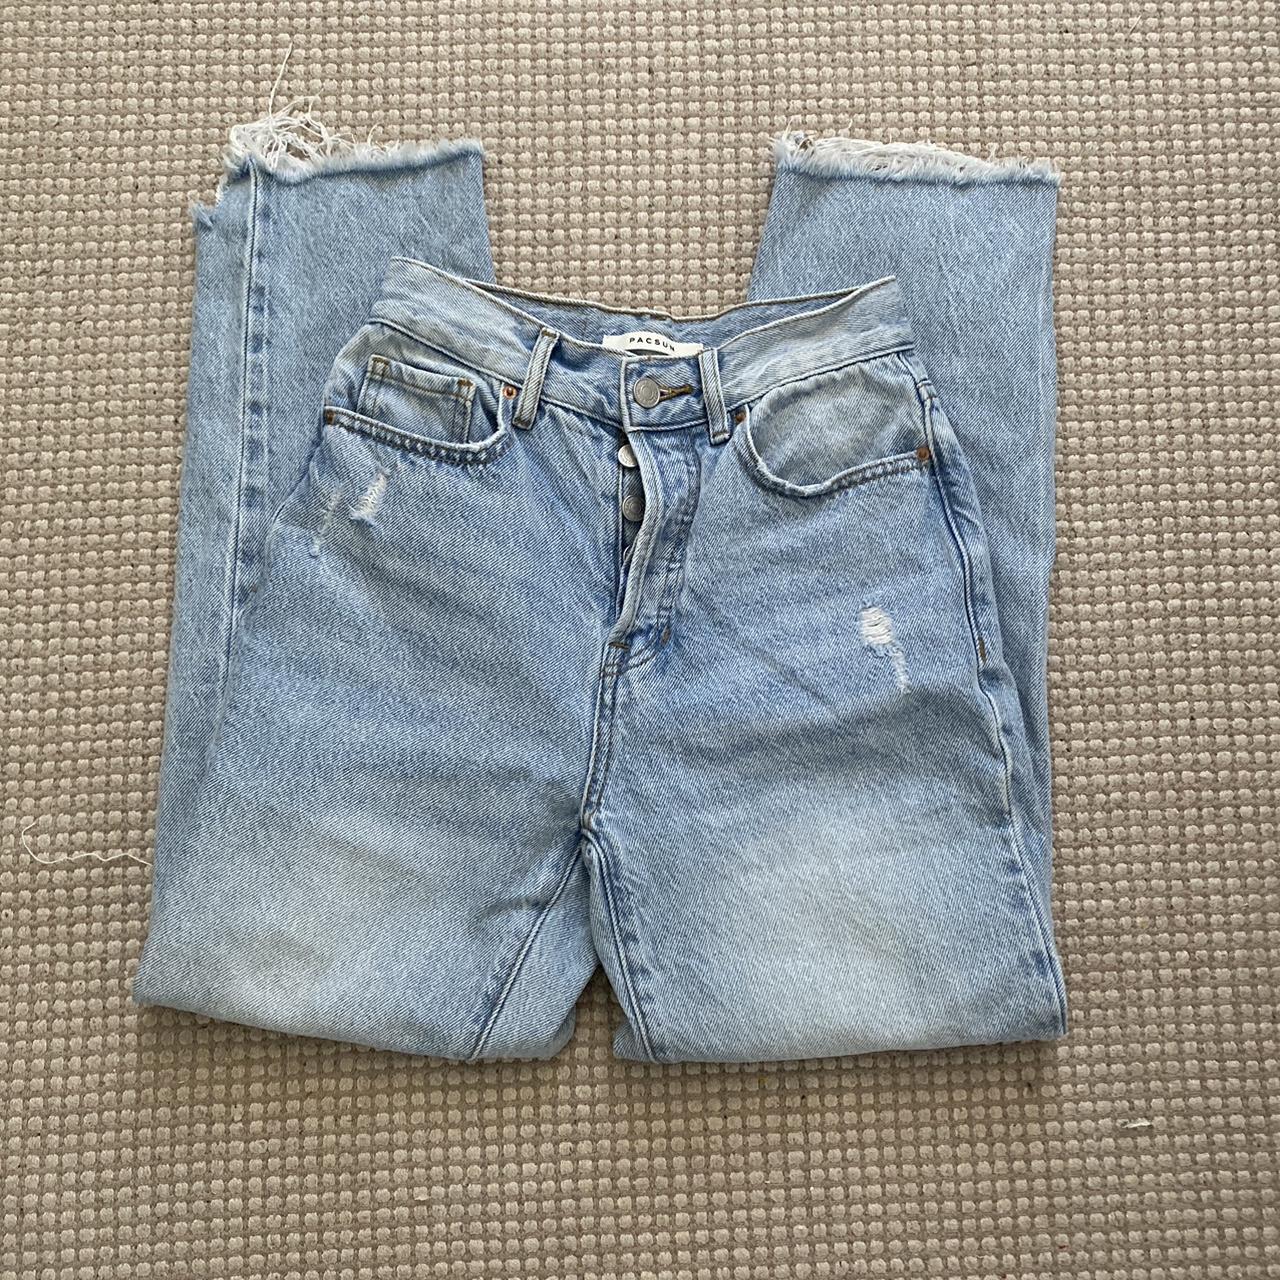 pacusn straight leg jeans - size 22 - high rised -... - Depop